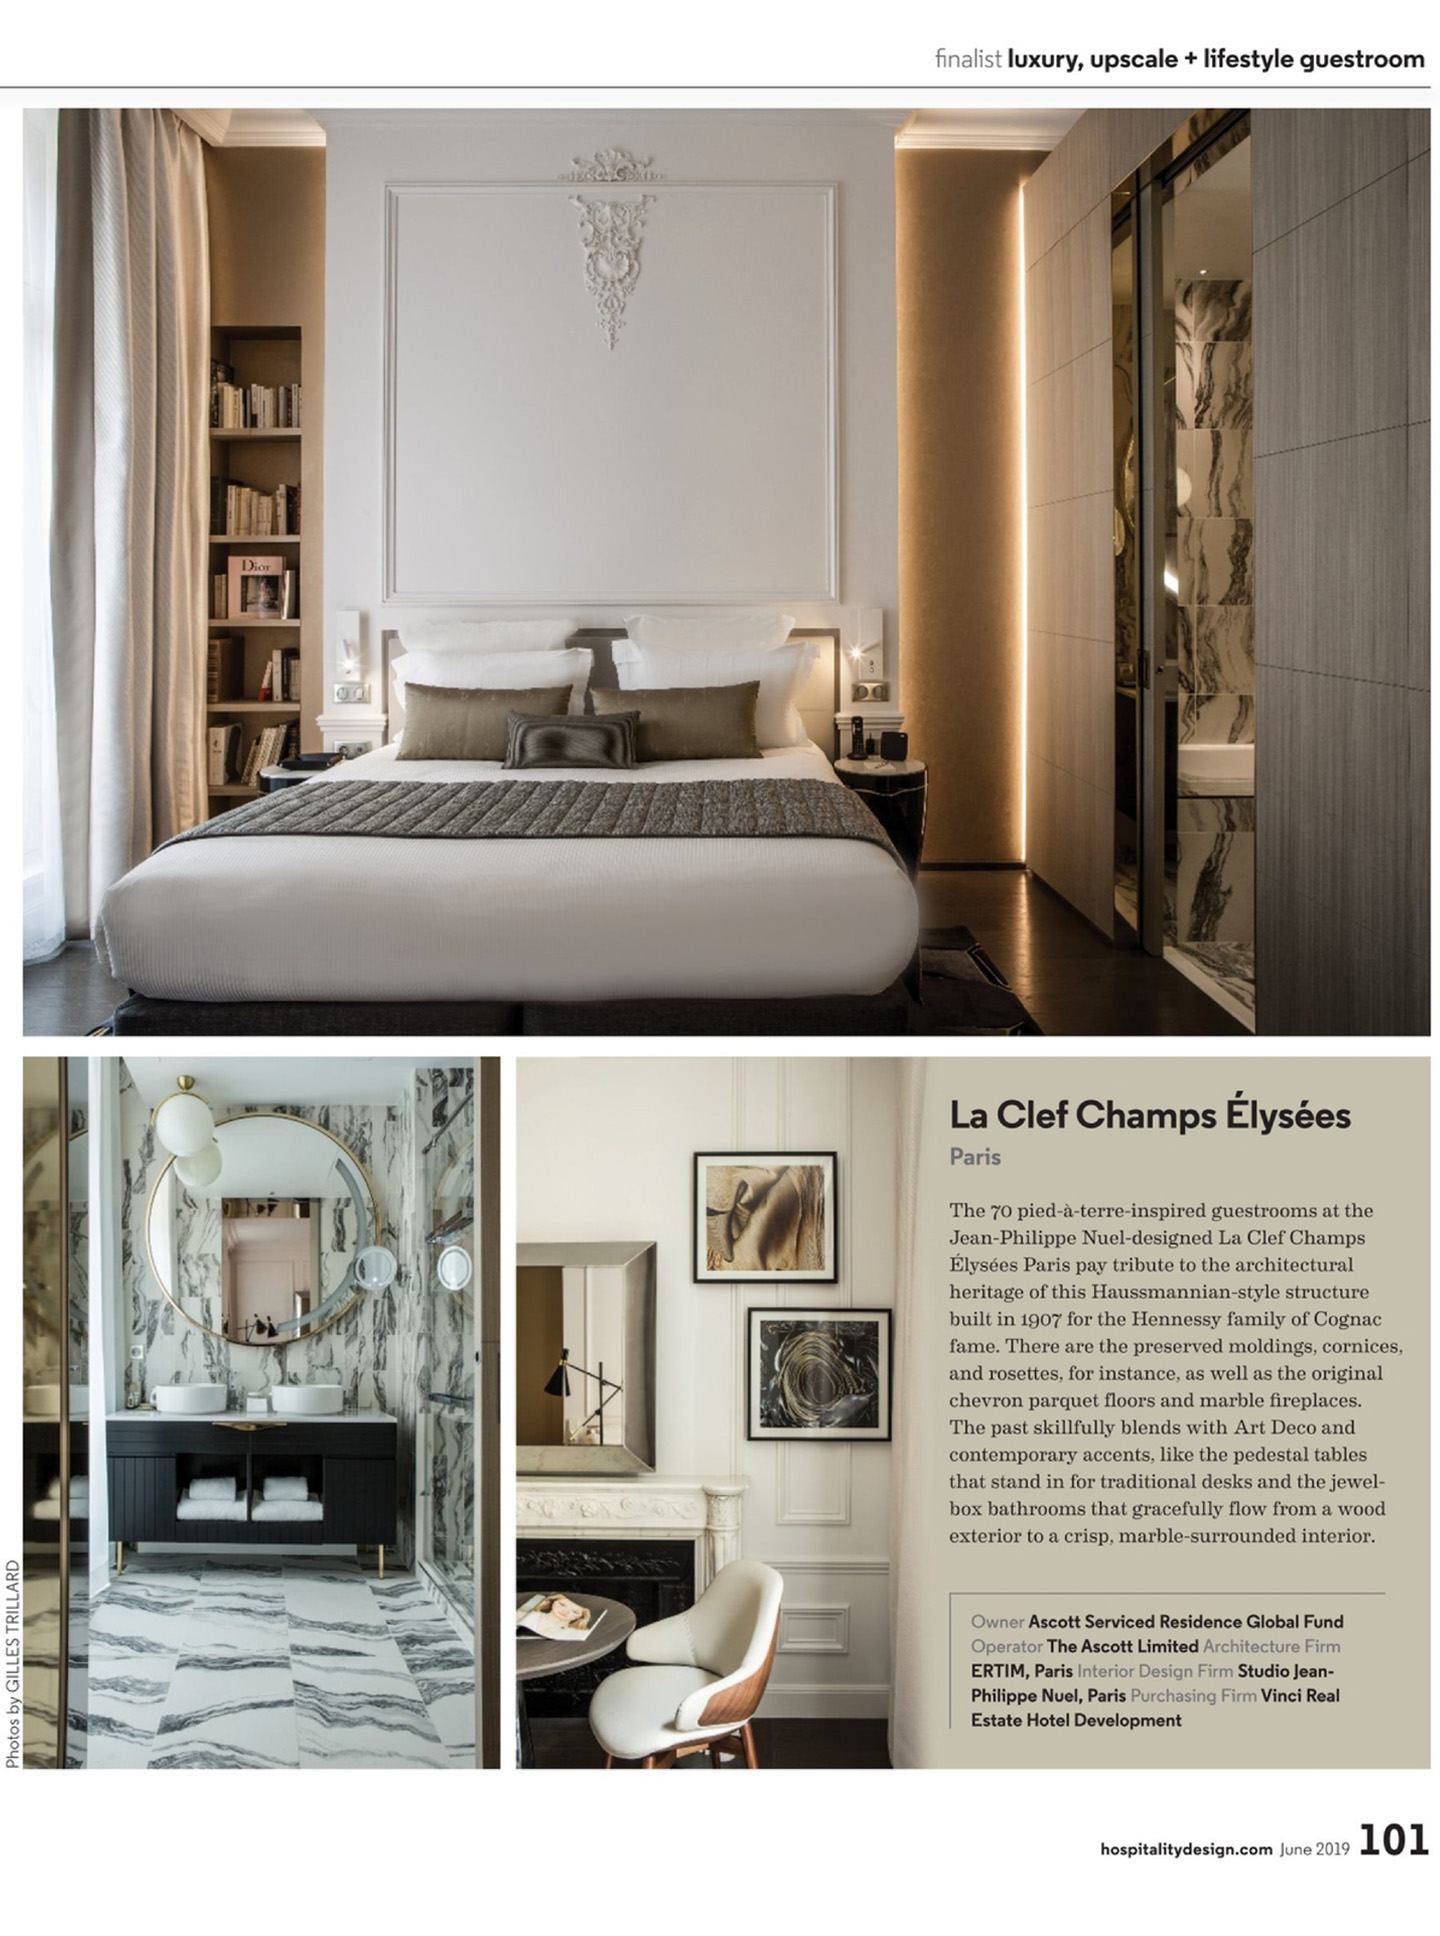 Article about la clef champs elysées paris made by jean-Philippe Nuel studio in hospitaity design magazine, new lifestyle hotel, luxury interior design, paris center, french luxury hotel